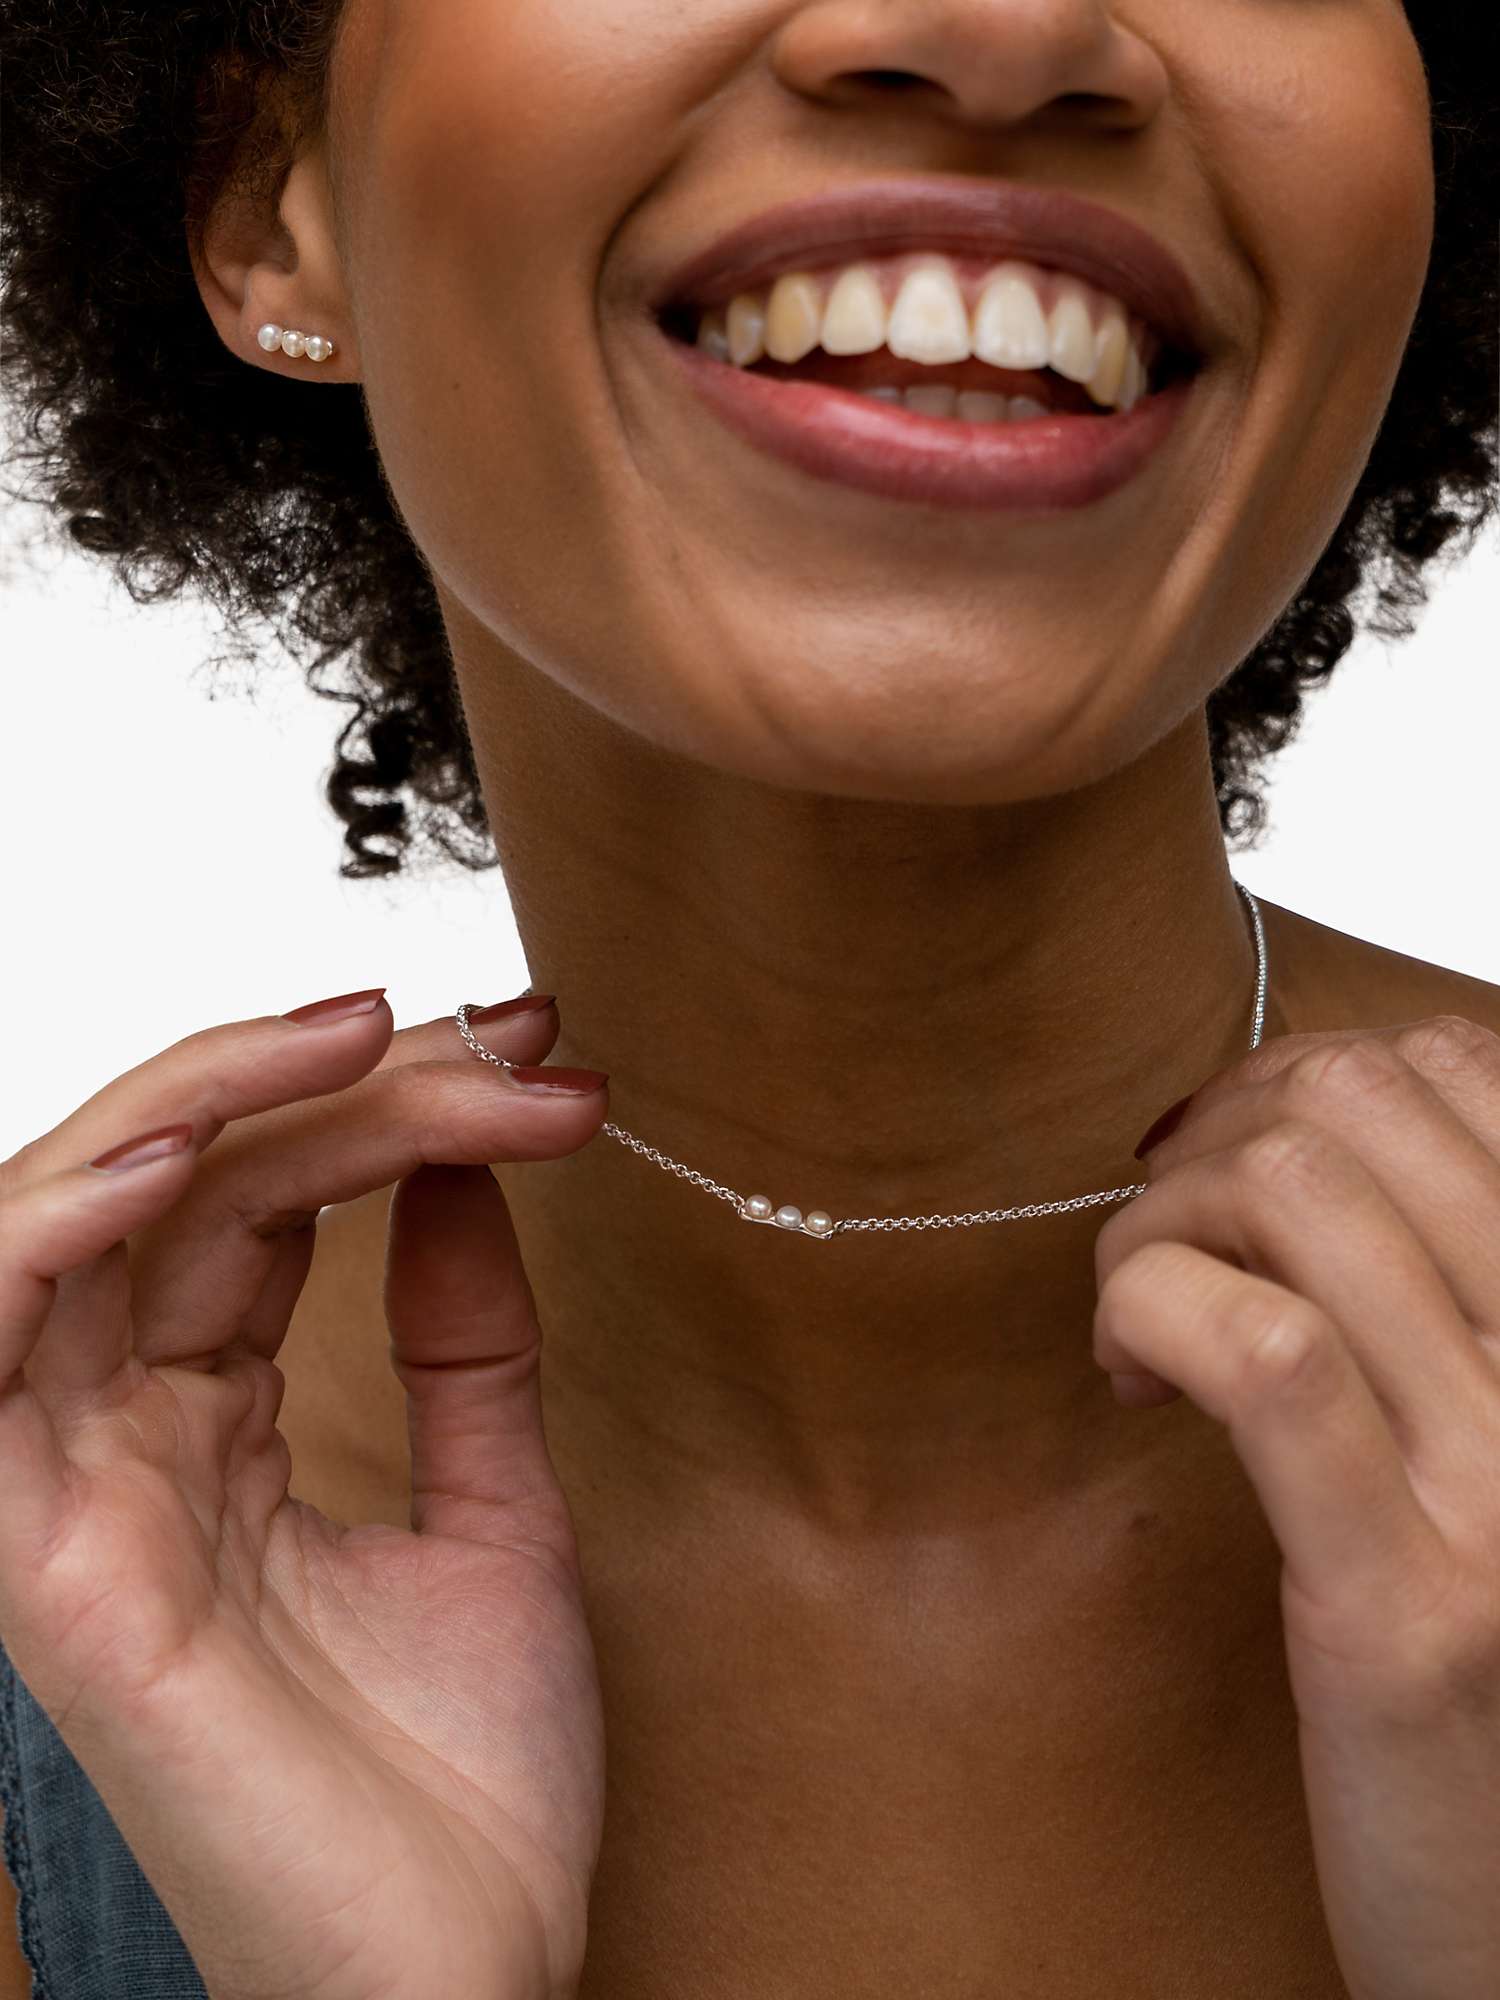 Buy Dower & Hall Timeless Triple Pearl Bar Pendant Fine Chain Necklace, Silver Online at johnlewis.com